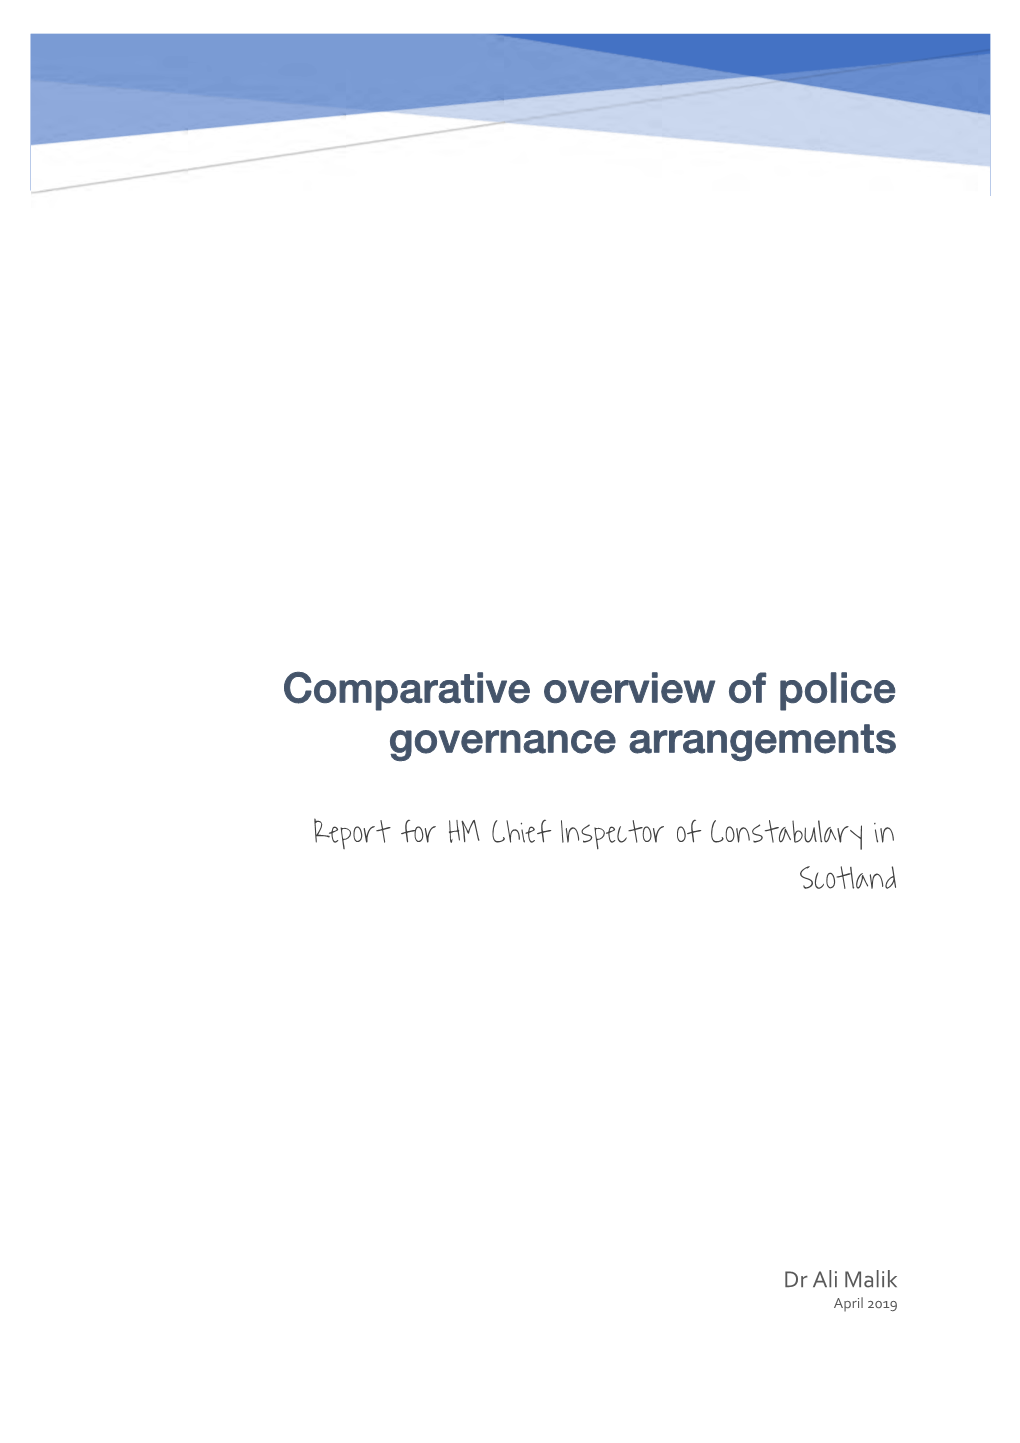 Comparative Overview of Police Governance Arrangements